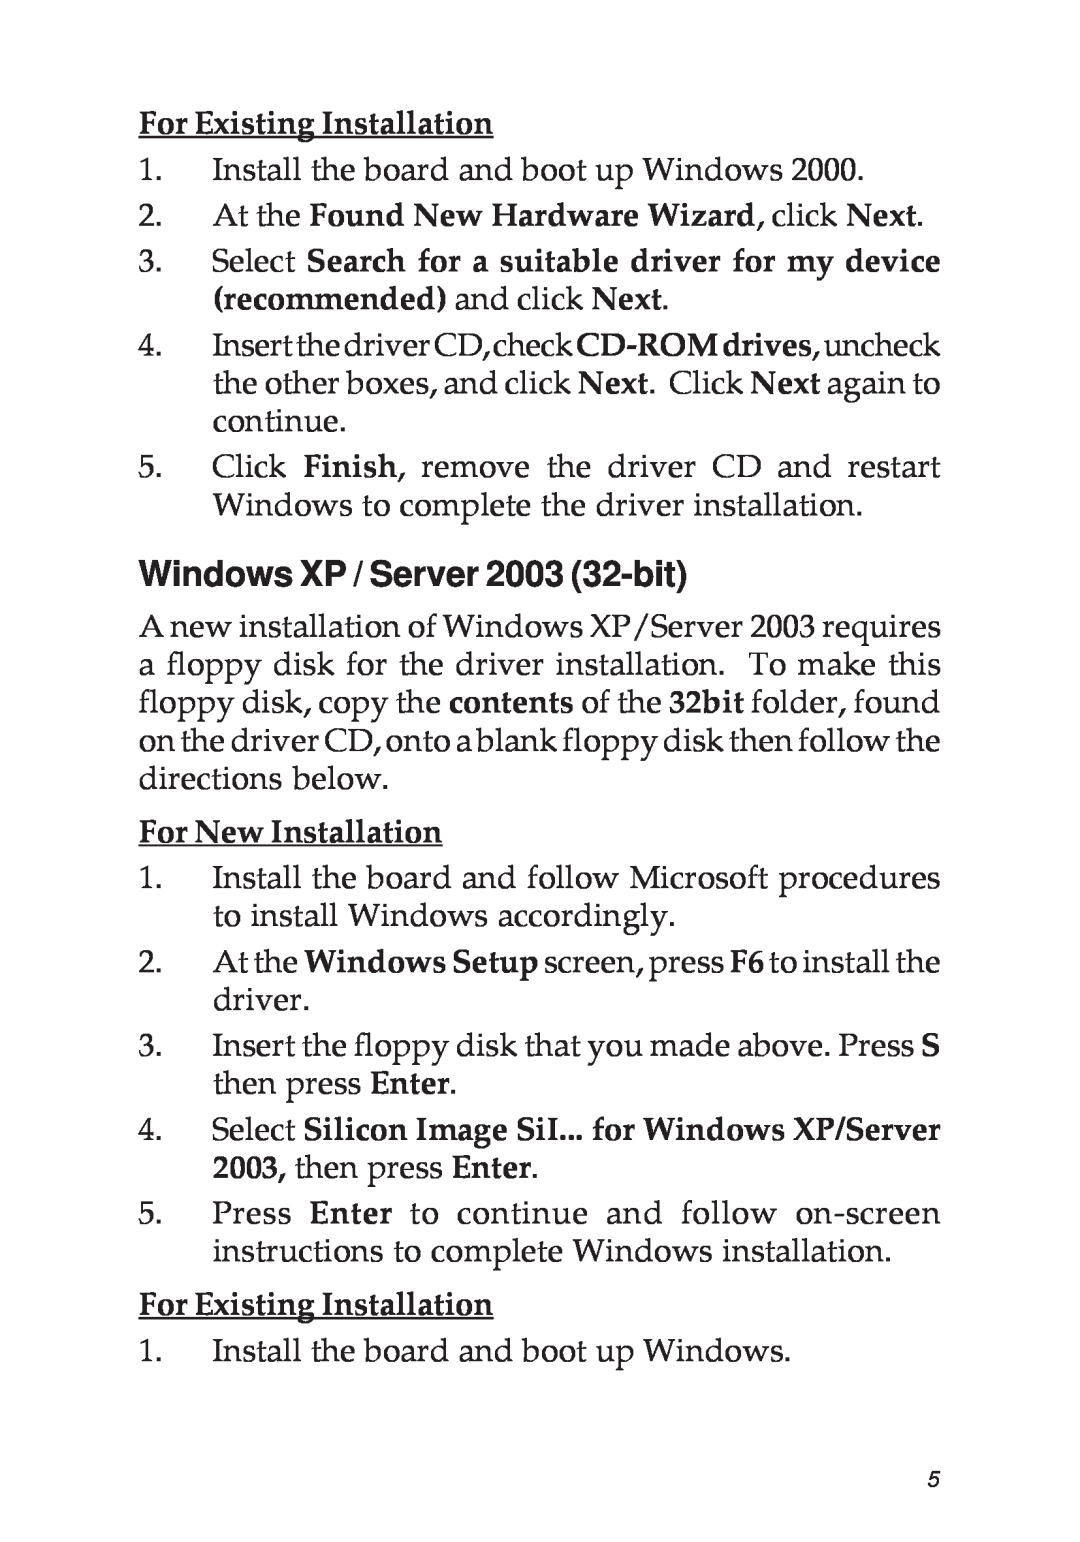 SIIG 04-0322C Windows XP / Server 2003 32-bit, For Existing Installation, At the Found New Hardware Wizard, click Next 